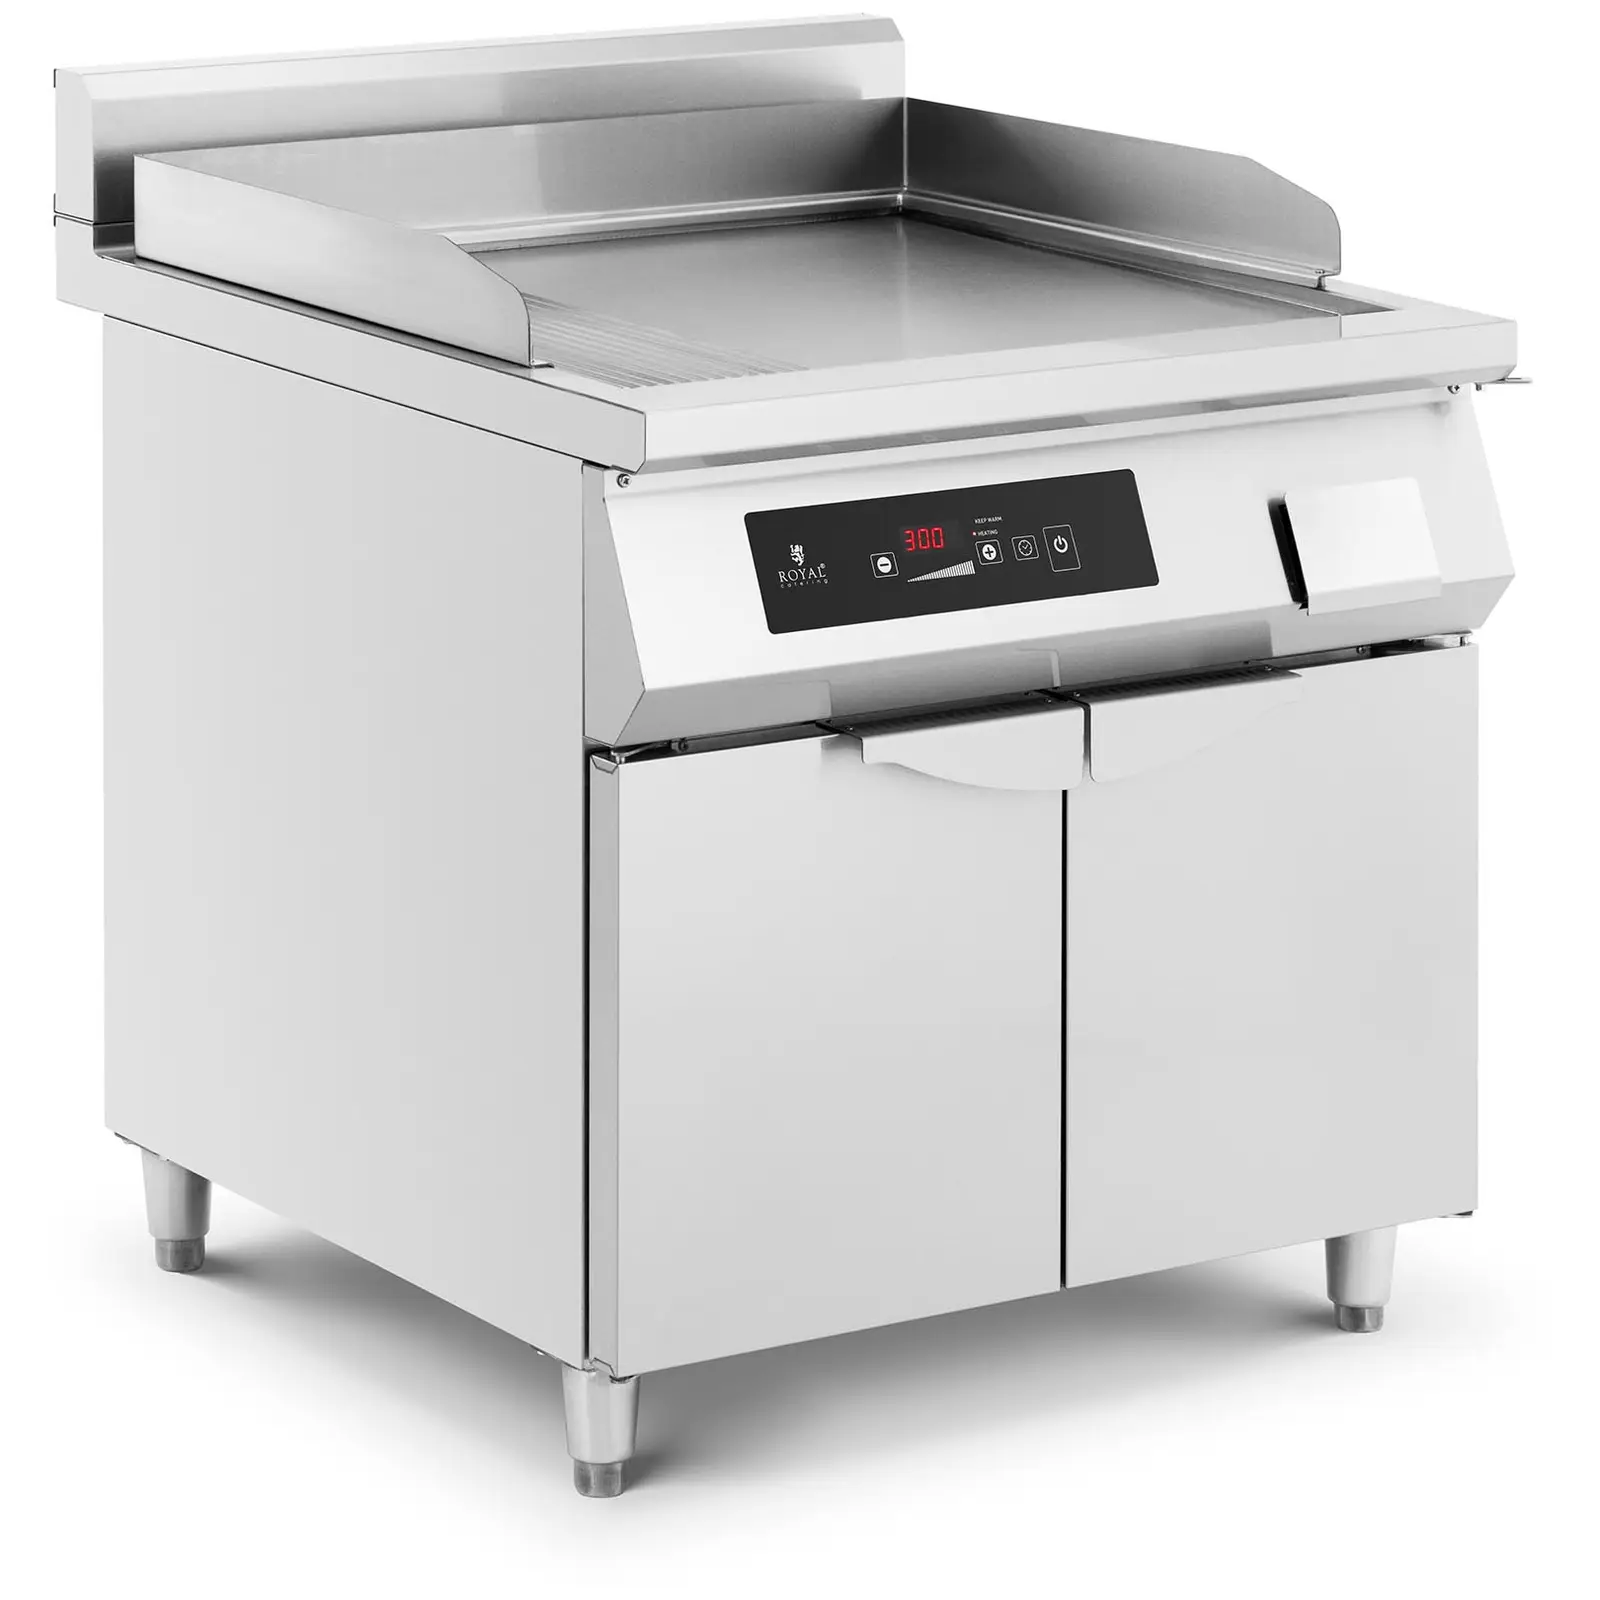 Indukciós grill - 720 x 610 mm - sima - 10000 W - Royal Catering